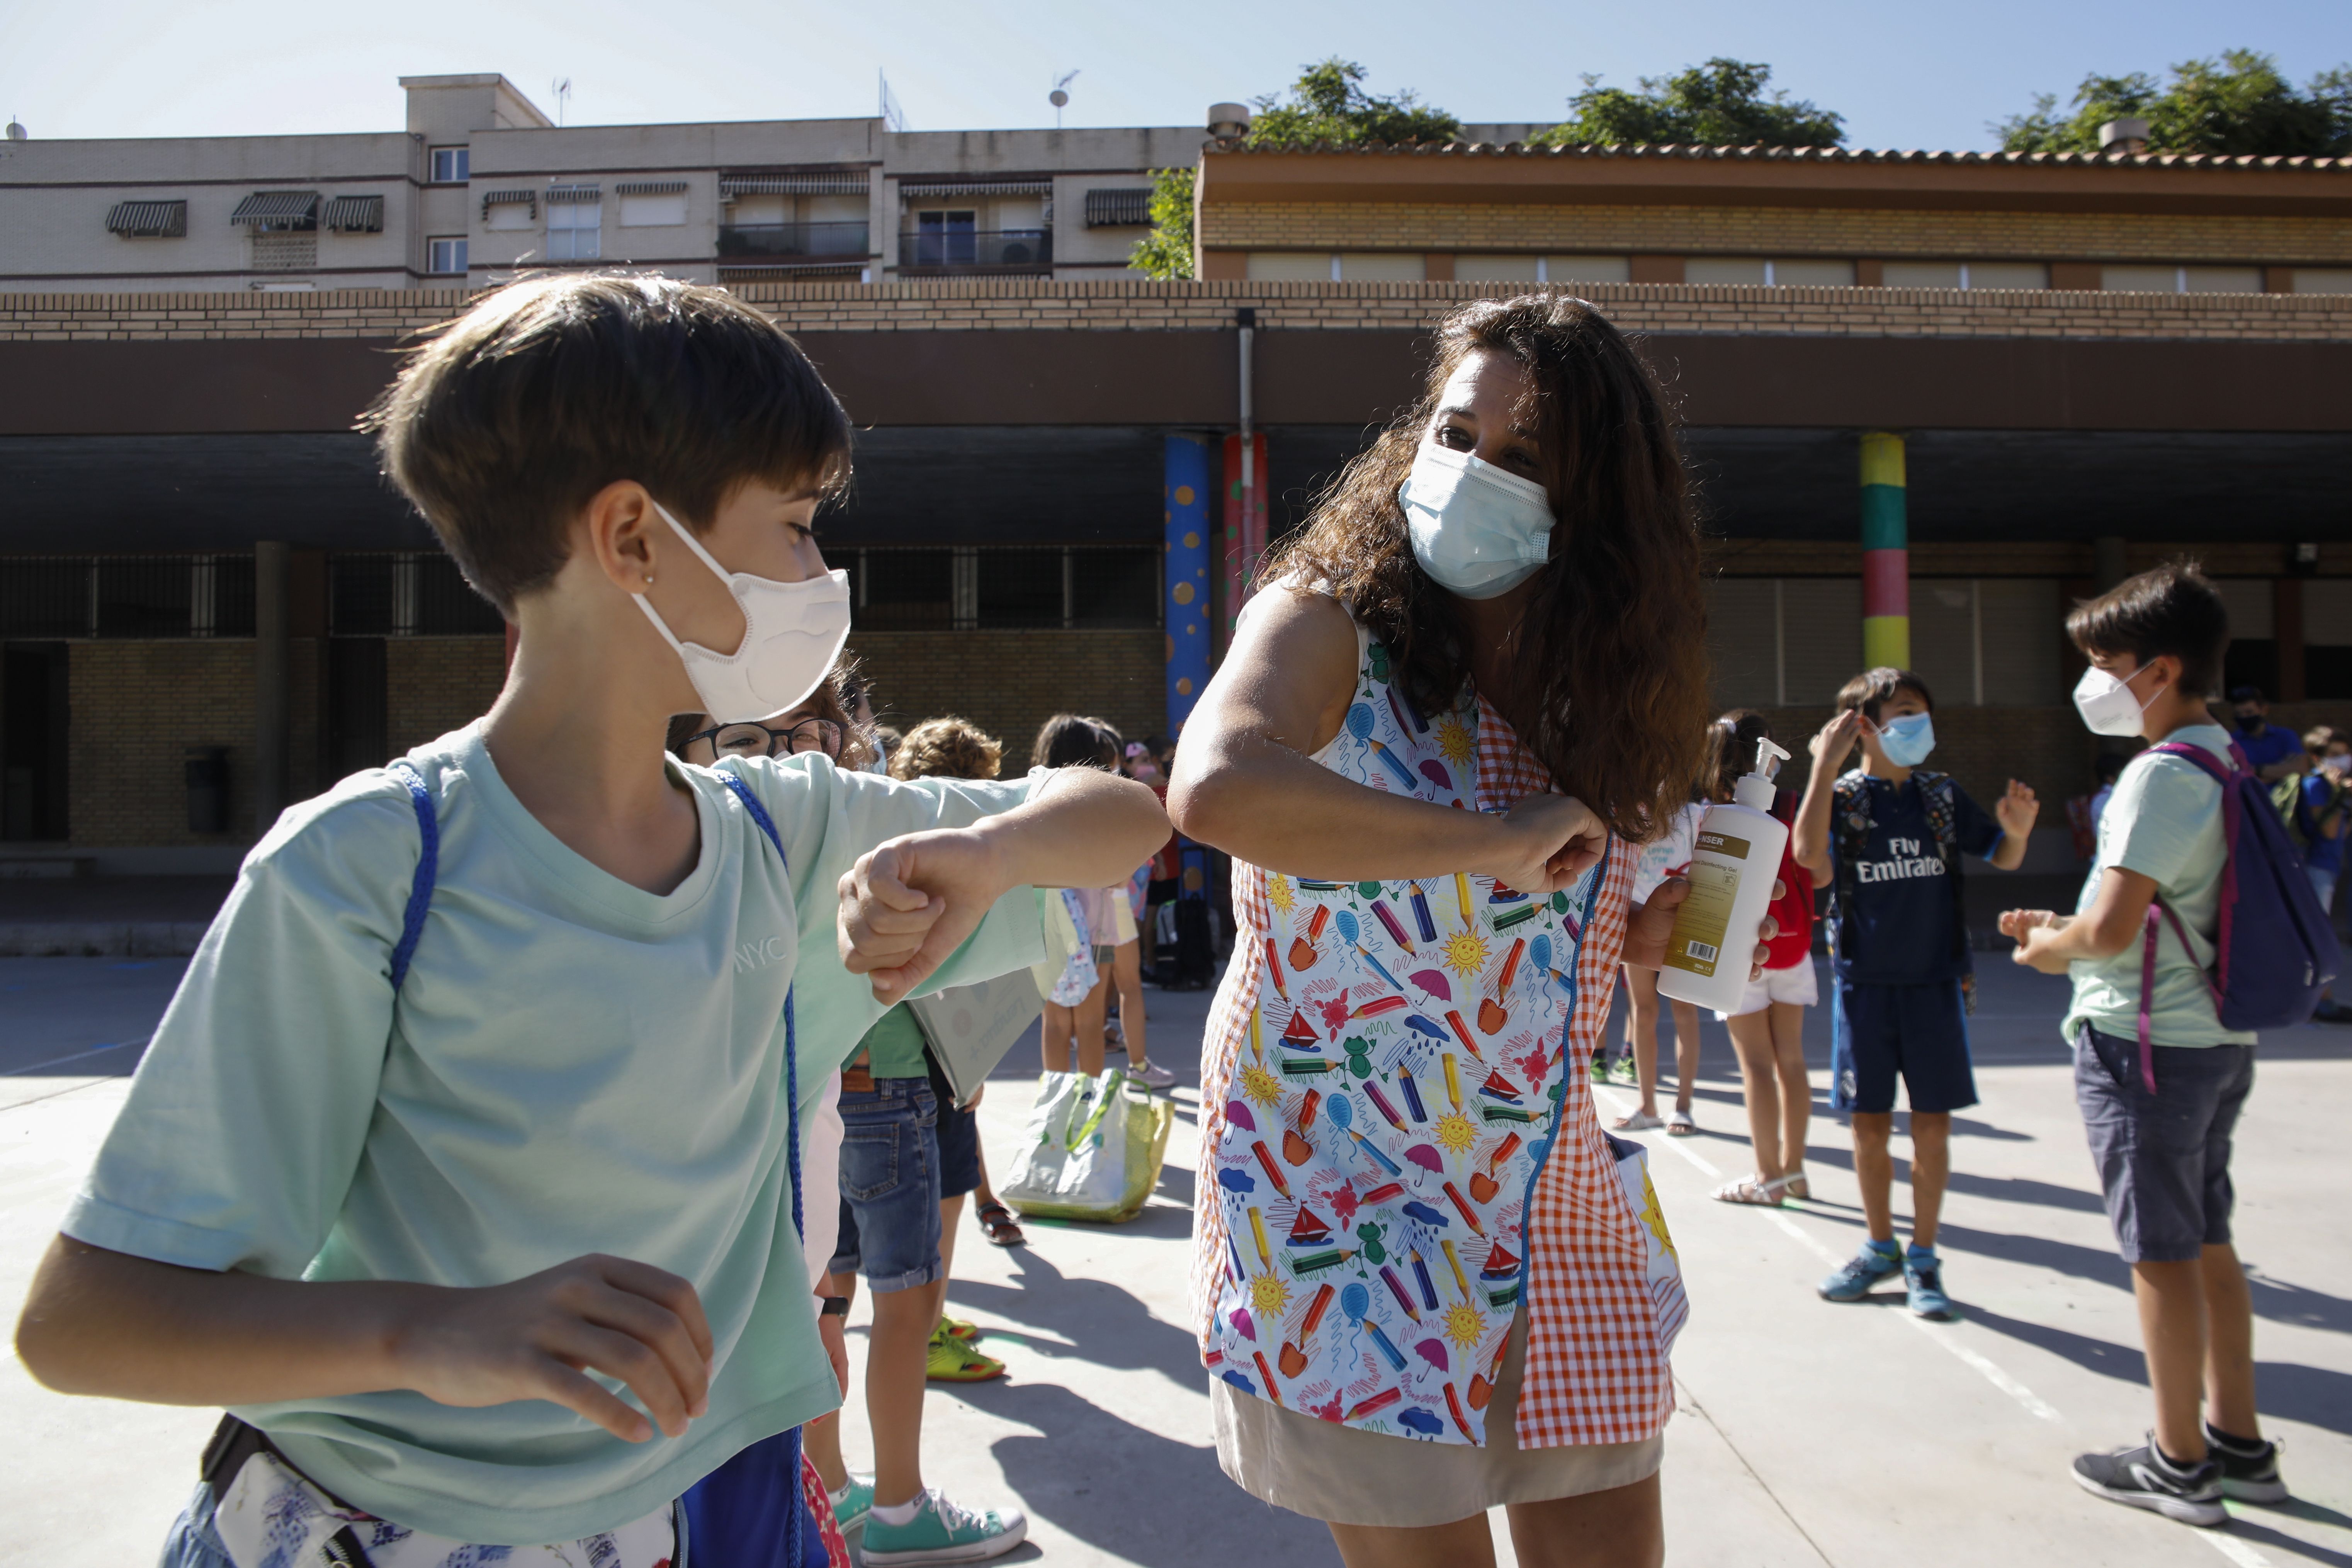  A teacher and a student bumping elbows before entering to class during the first day of school on September 10, 2020 in Granada, Spain. 